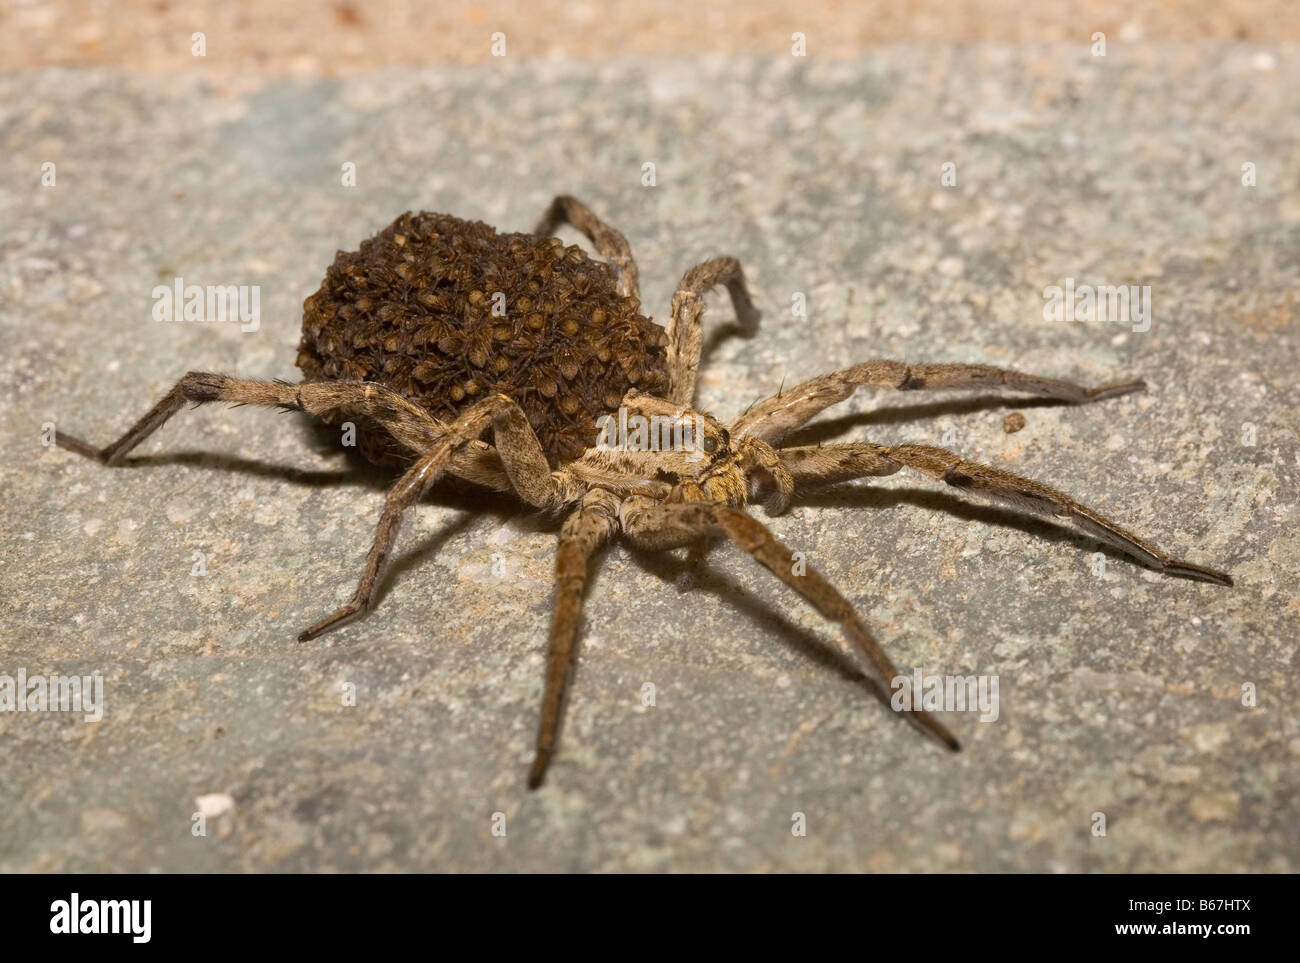 Female Wolf Spider Lycosa narbonensis carrying hundreds of spiderlings on her back Peloponnese Greece Stock Photo